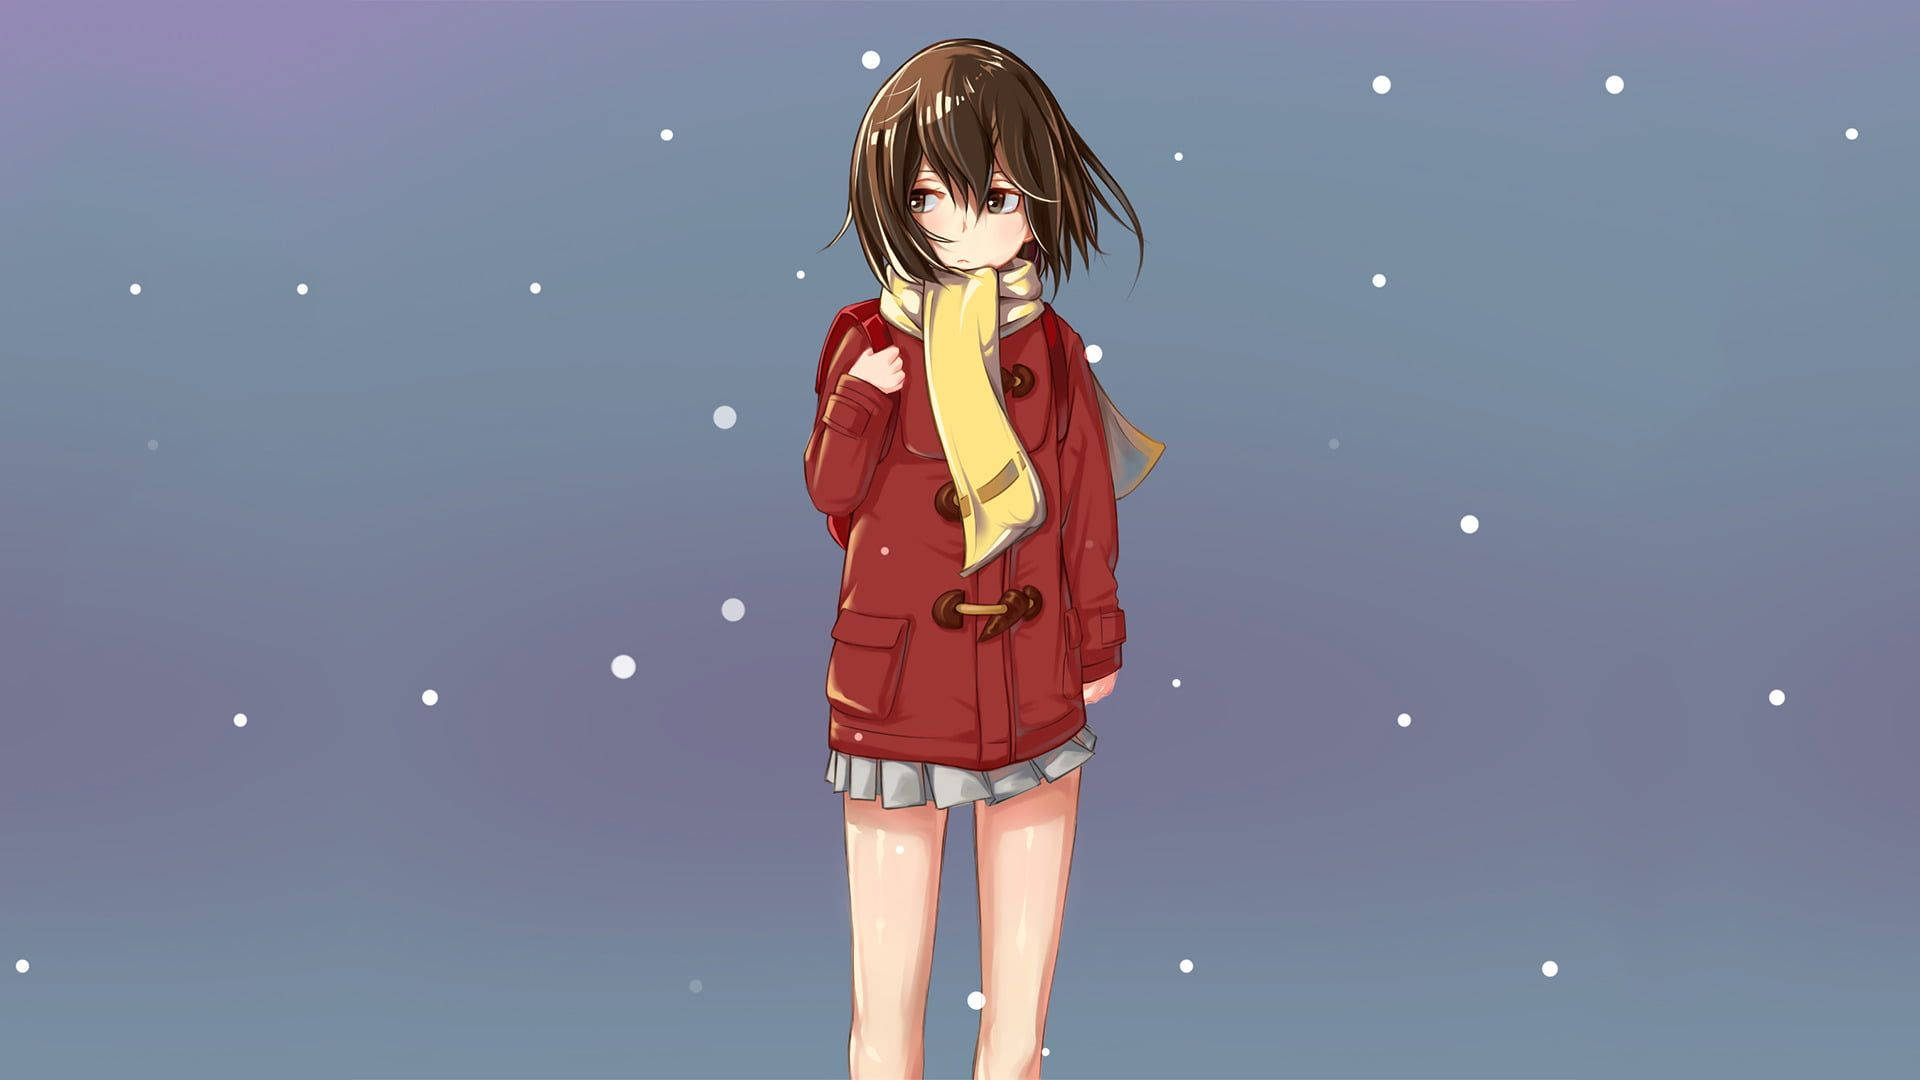 Female Character In Erased Film